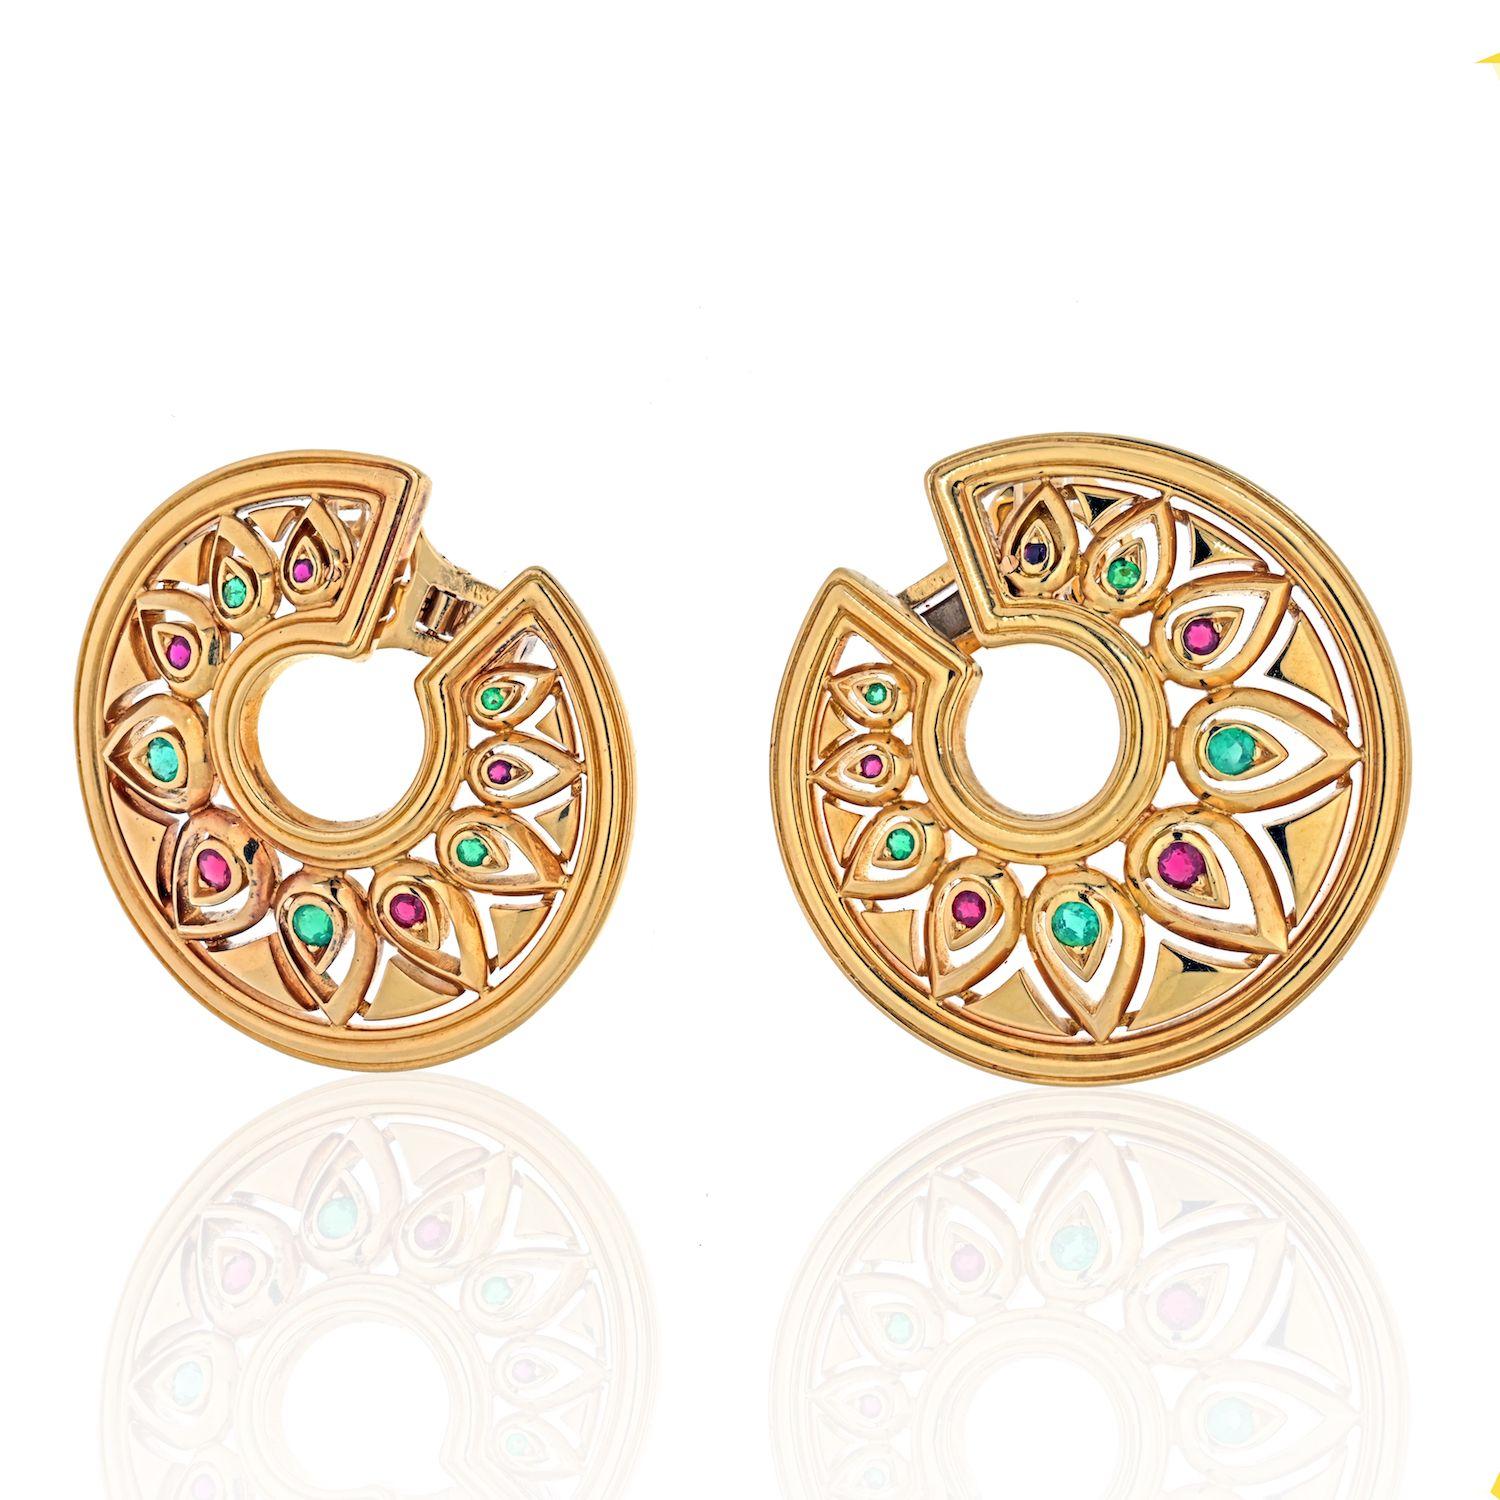 Beautiful and oh so special these Cartier ear-clips are from the 1970-1980's era. Each of round outline with stylized pear shapes in open work design set with green emeralds and rubies. 
Earrings are for pierced ears. 
Each earring measures: 40mm